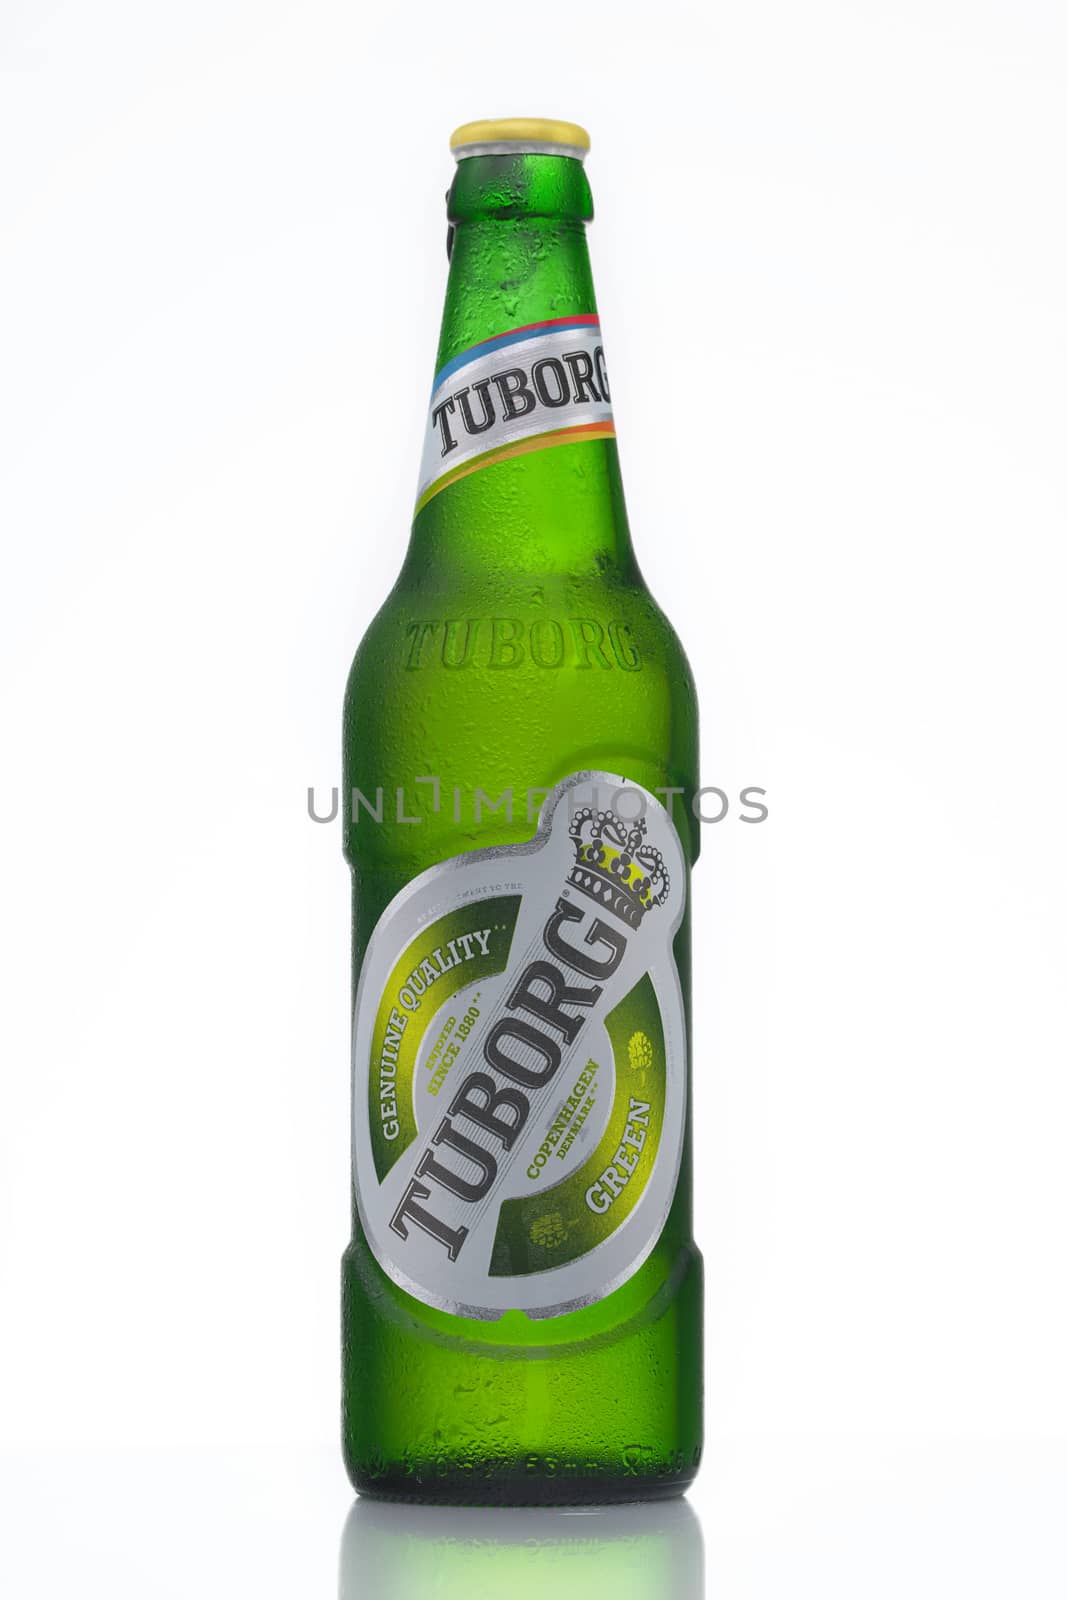 Tuborg is a Danish brewing company founded in 1873 by Carl Frederik Tietgen. Since 1970 it has been part of the Carlsberg Group. The brewery was founded in Hellerup (Gentofte Municipality), a part of northern Copenhagen, Denmark.                               